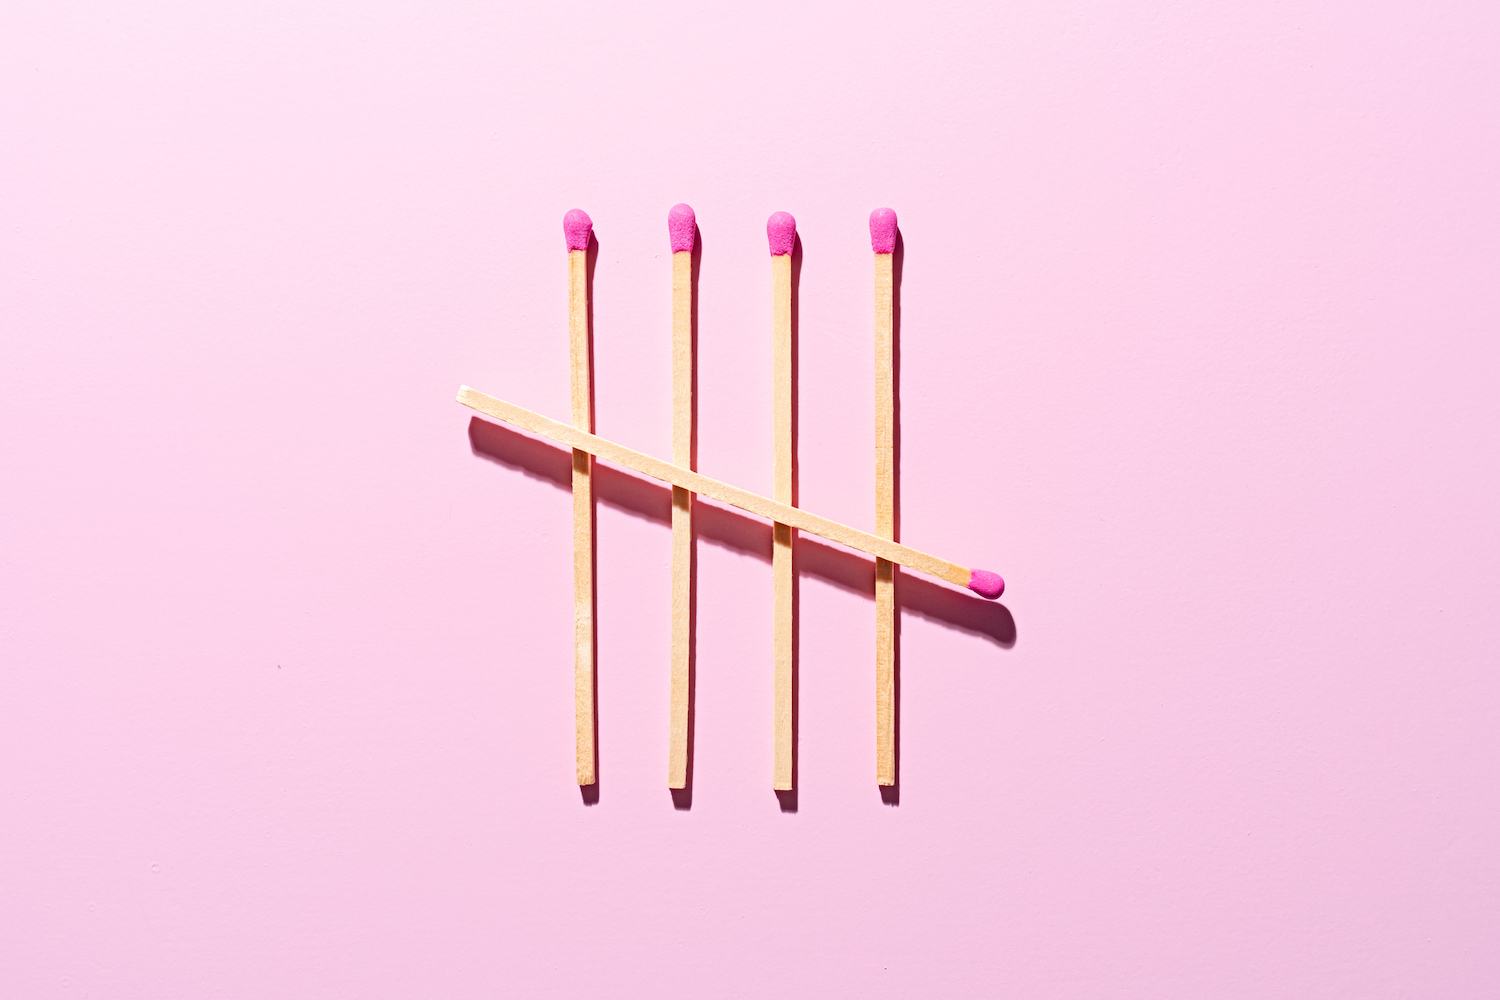 Finished Matchsticks Tally Chart on Pink Background Directly Above View.